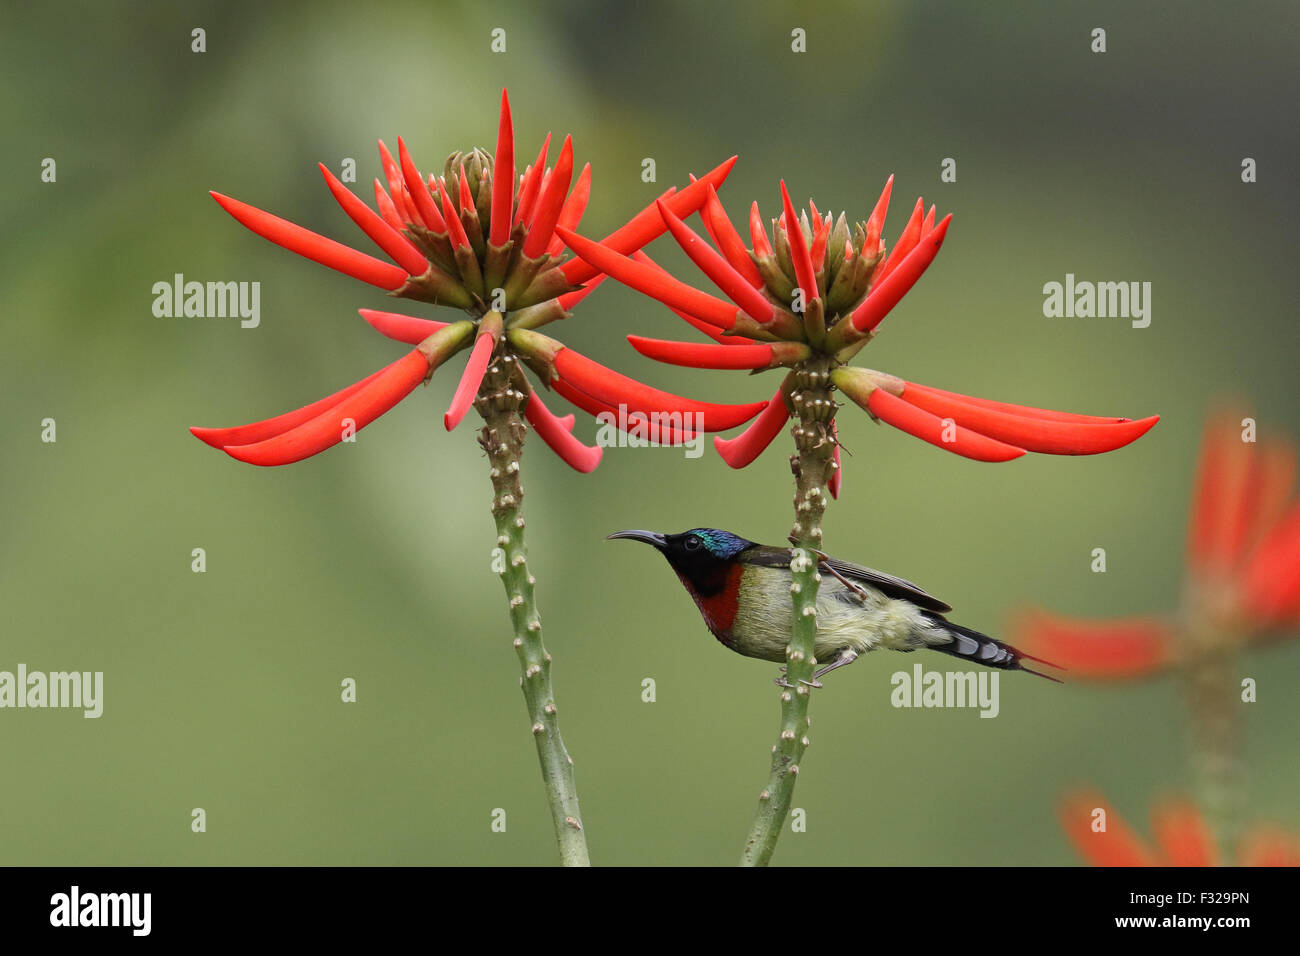 Fork-tailed Sunbird (Aethopyga christinae) adult male, perched in Red Hot Poker Tree (Erythrina speciosa), Hong Kong, China, April Stock Photo